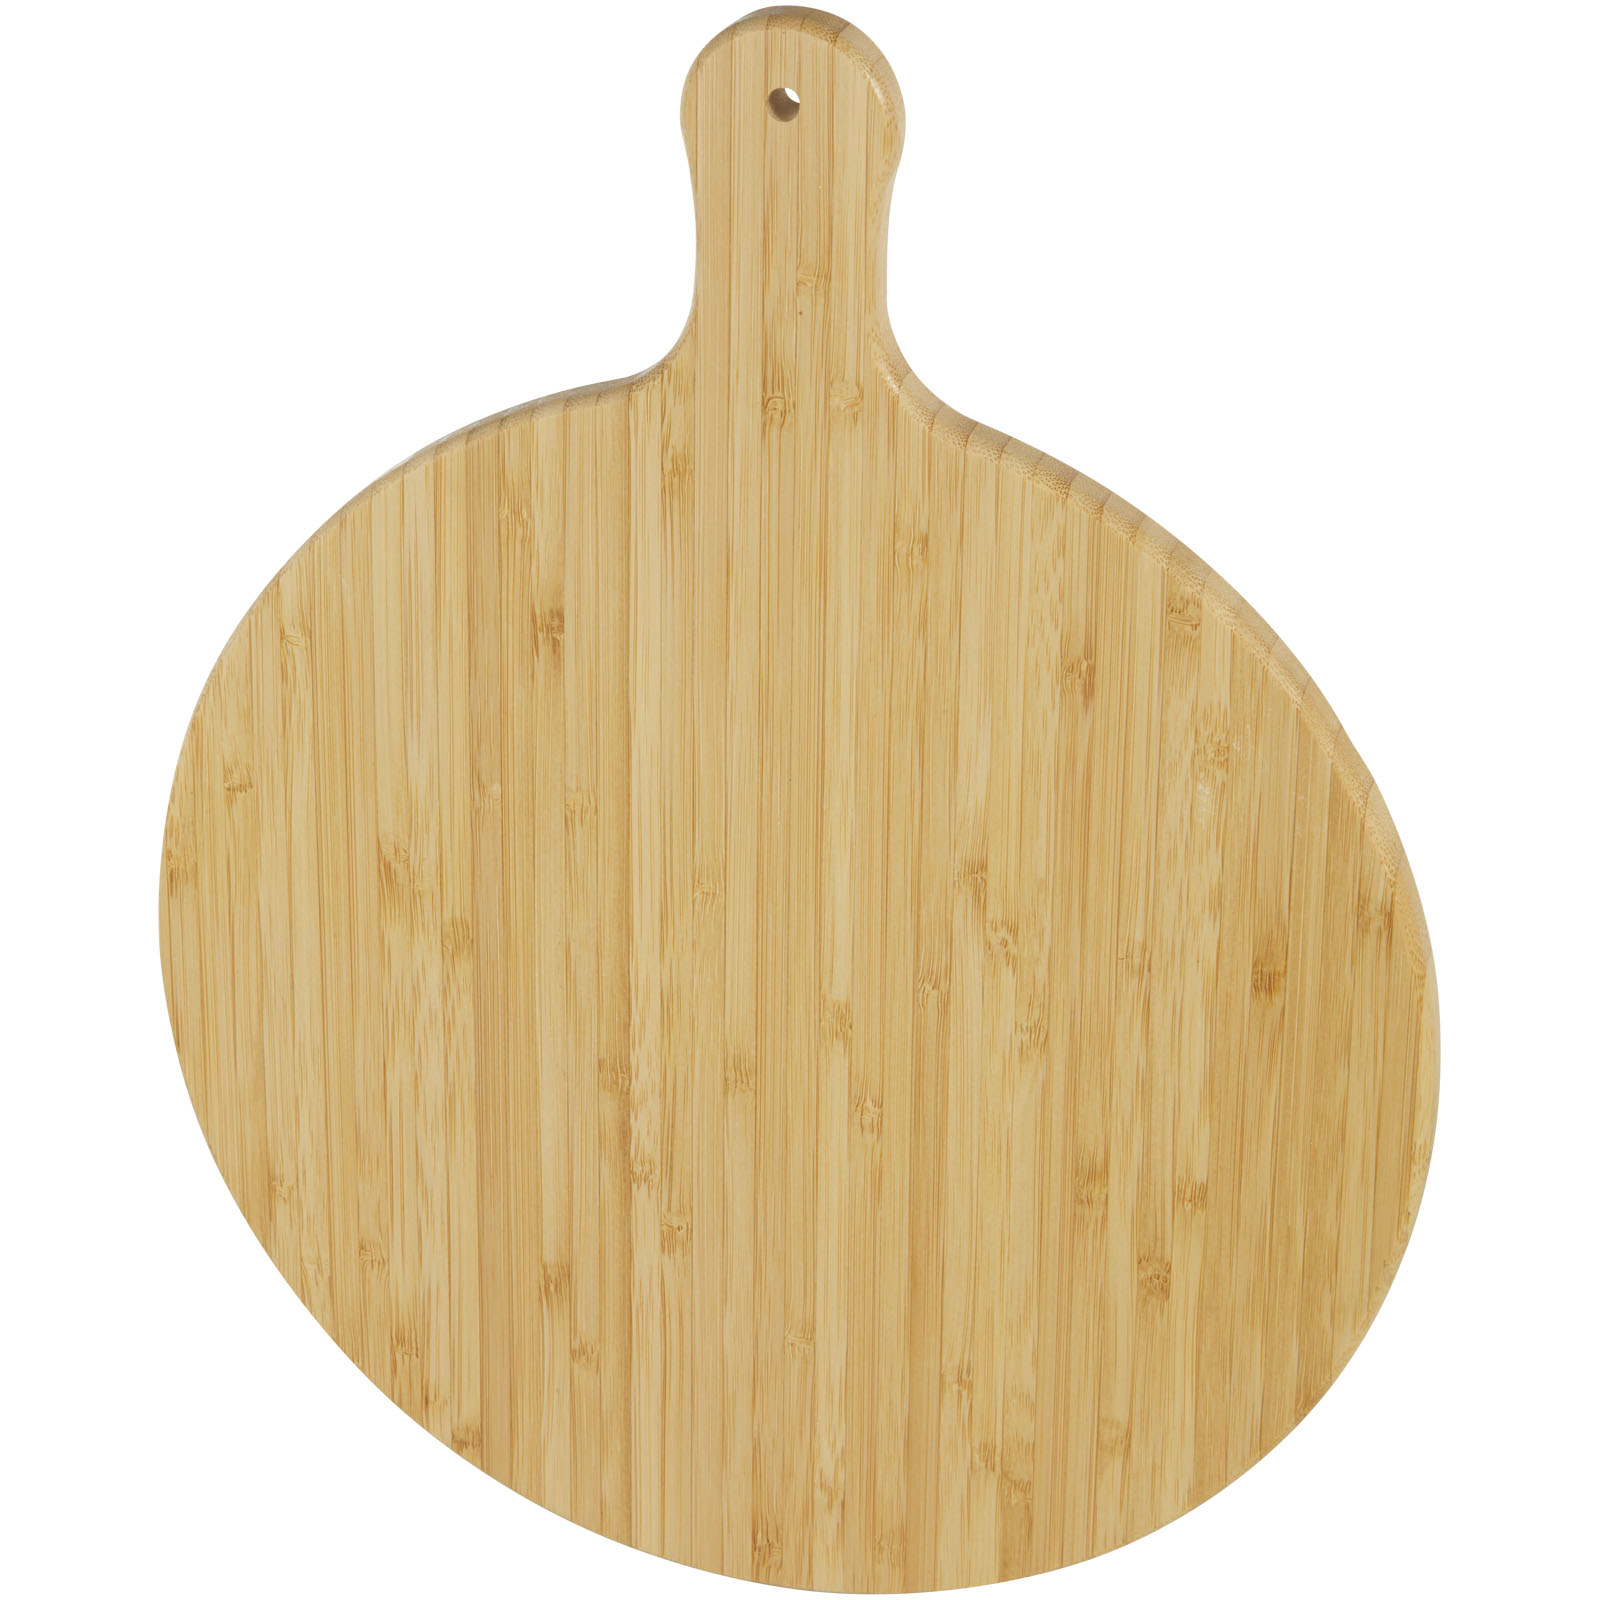 Advertising Cutting Boards - Delys bamboo cutting board - 0